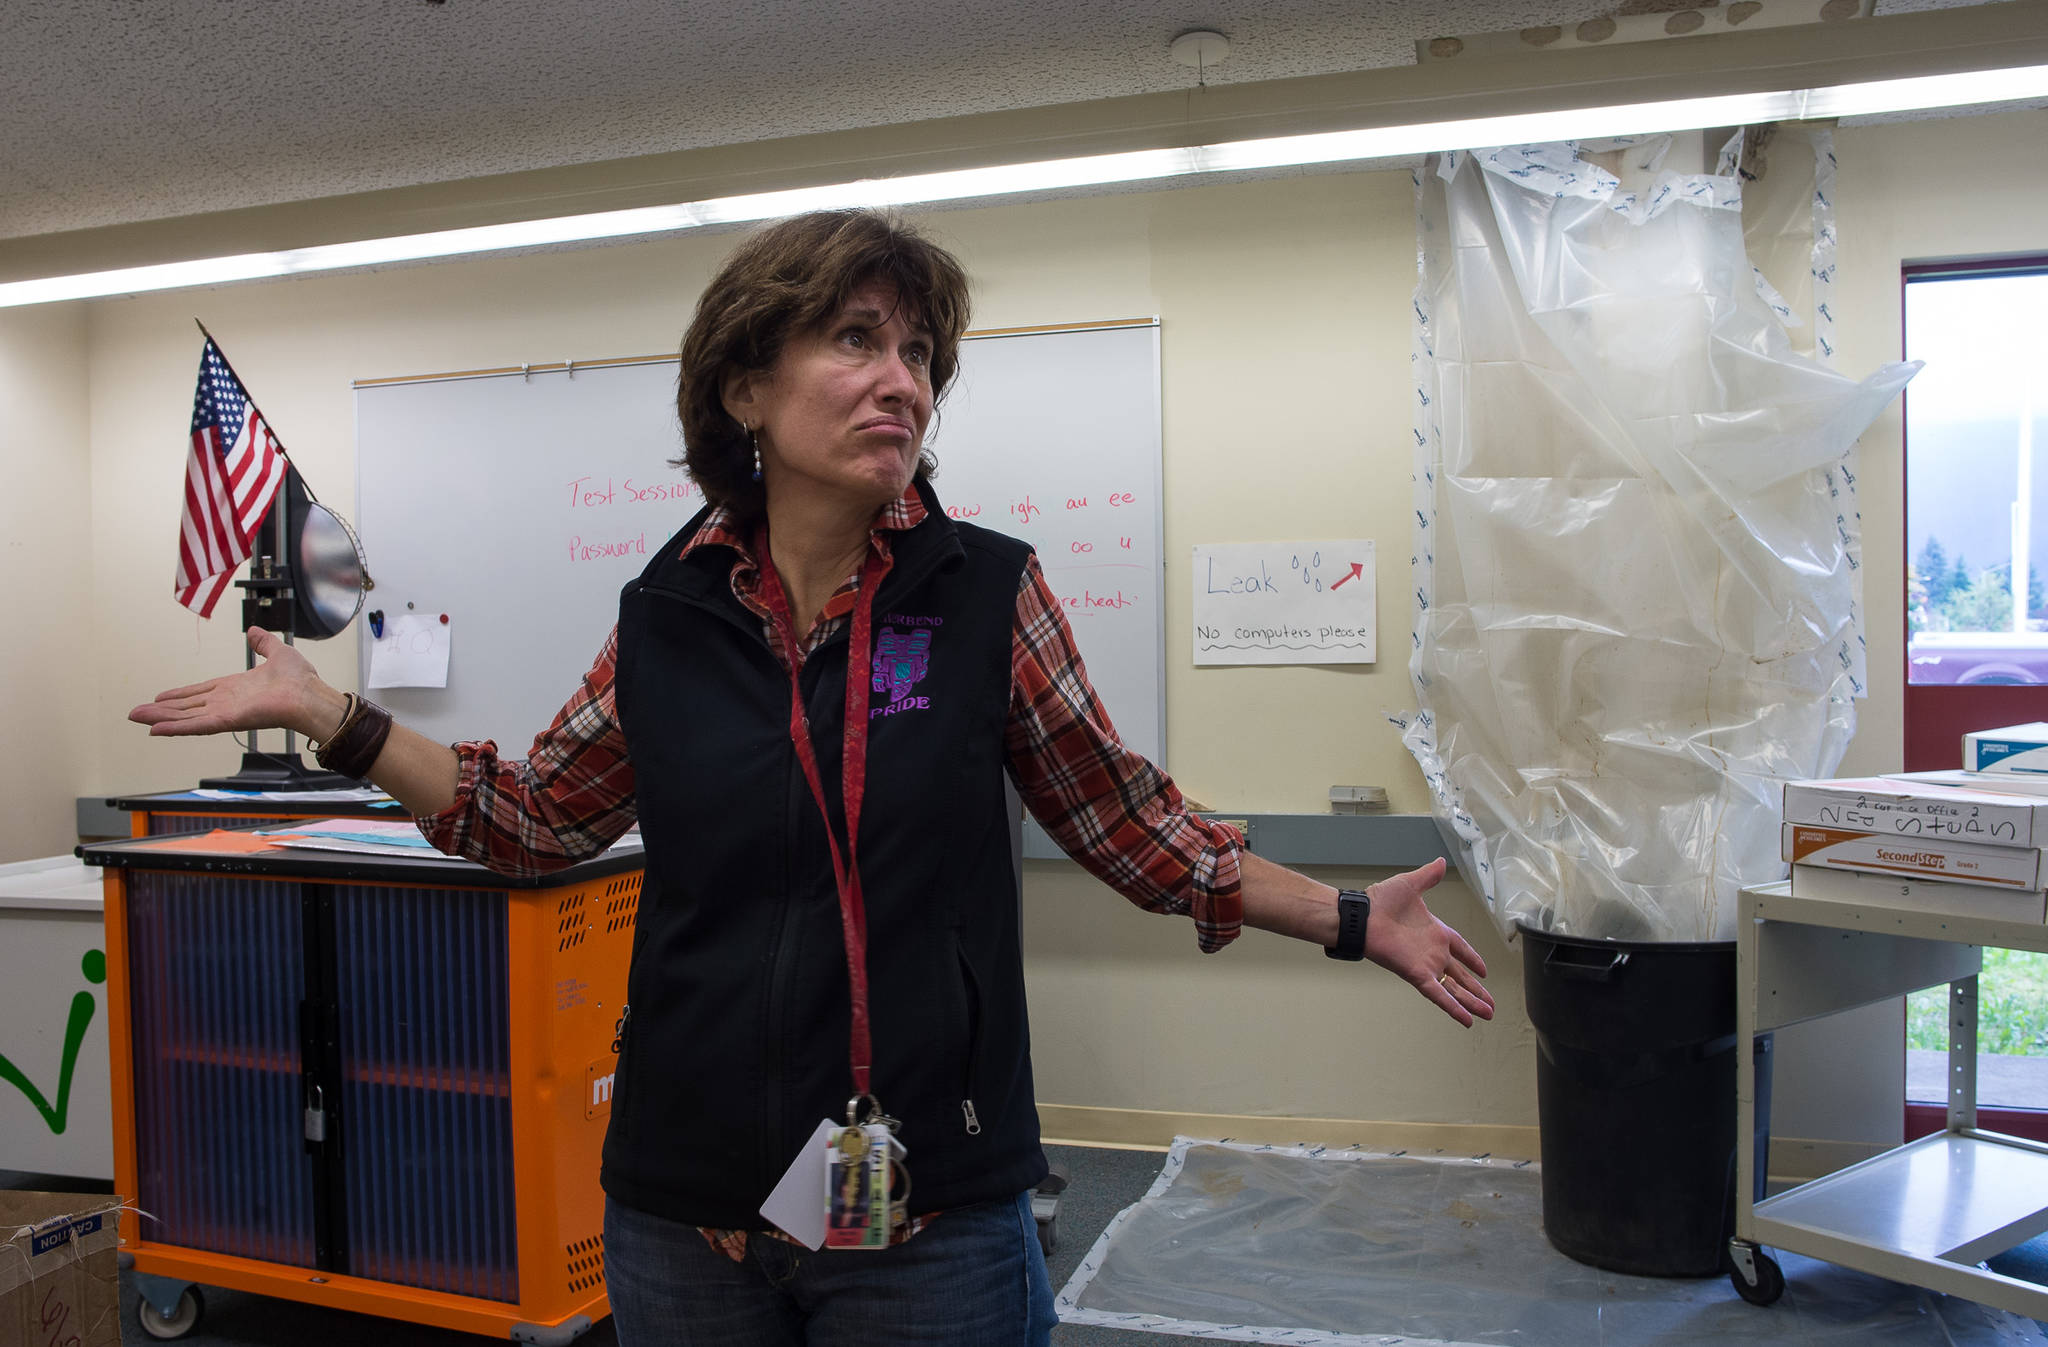 Principal Michelle Byer expresses her frustration with roof leaks at Riverbend Elementary School that drain into the school’s computer lab on Friday, Sept. 15, 2017. (Michael Penn | Juneau Empire)